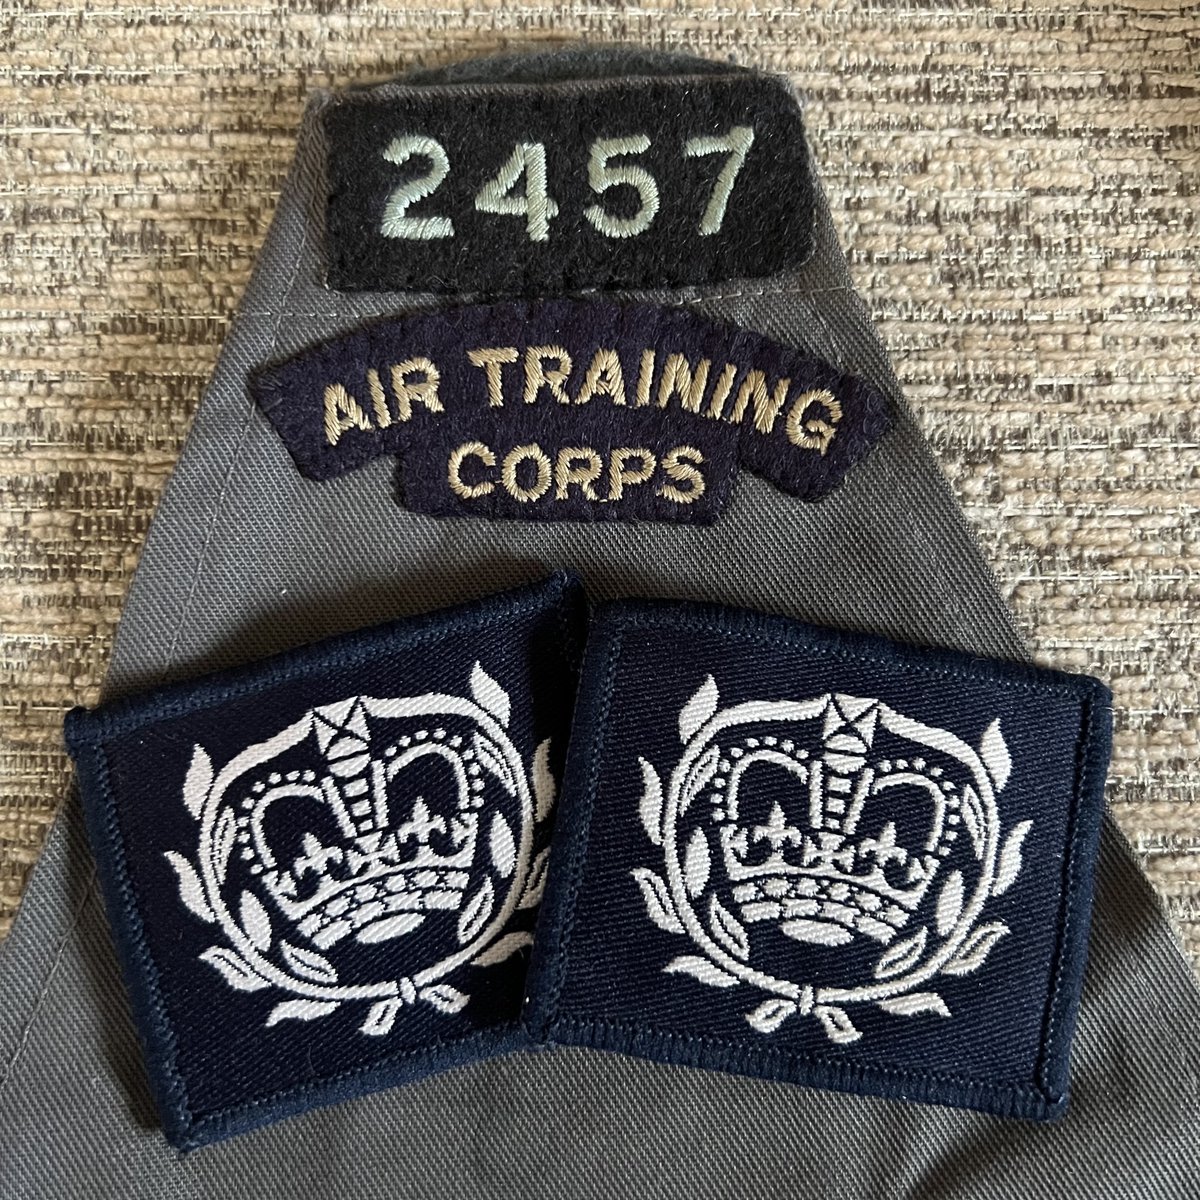 30 years ago today my cadet service came to an end with my appointment as a Pilot Officer. In that time the organisation has seen many changes, and more are coming as RAFAC Astra gathers pace. I look forward to seeing how @aircadets will Venture and Adventure into the future…